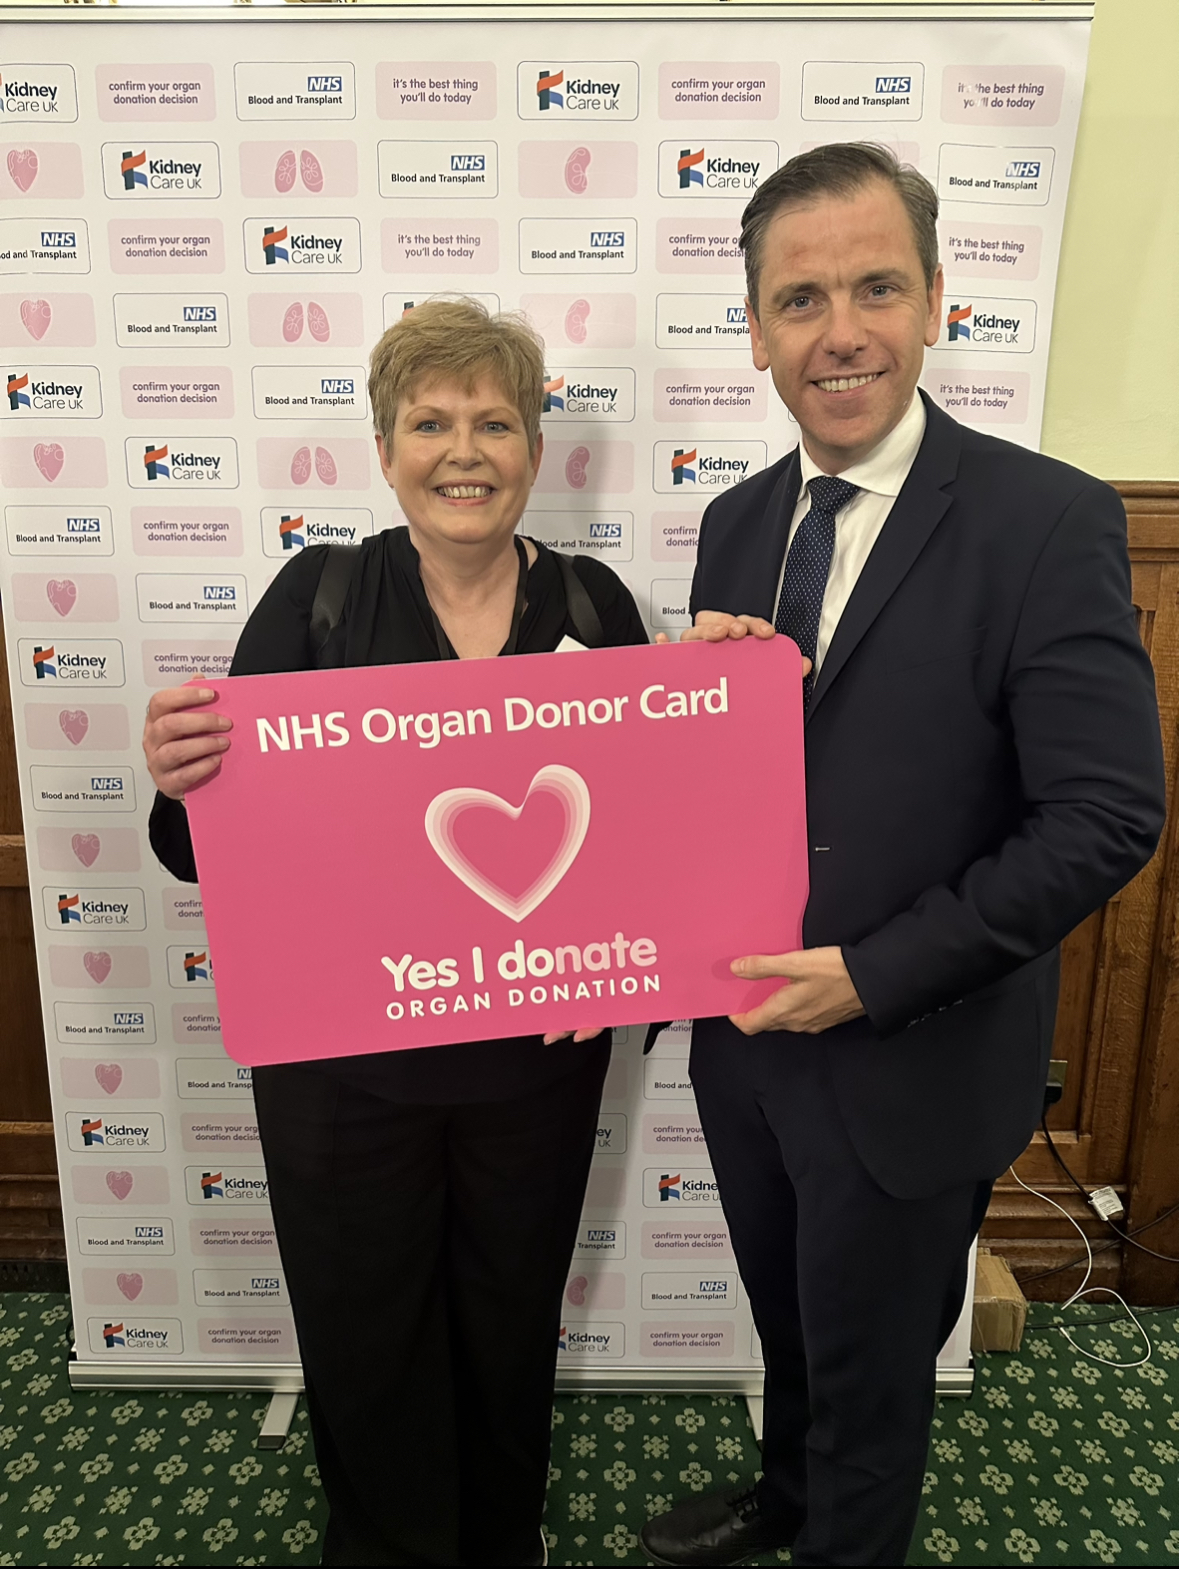 Chris Evans MP stands with a constituent holding a sign that reads: NHS Organ Donor Card